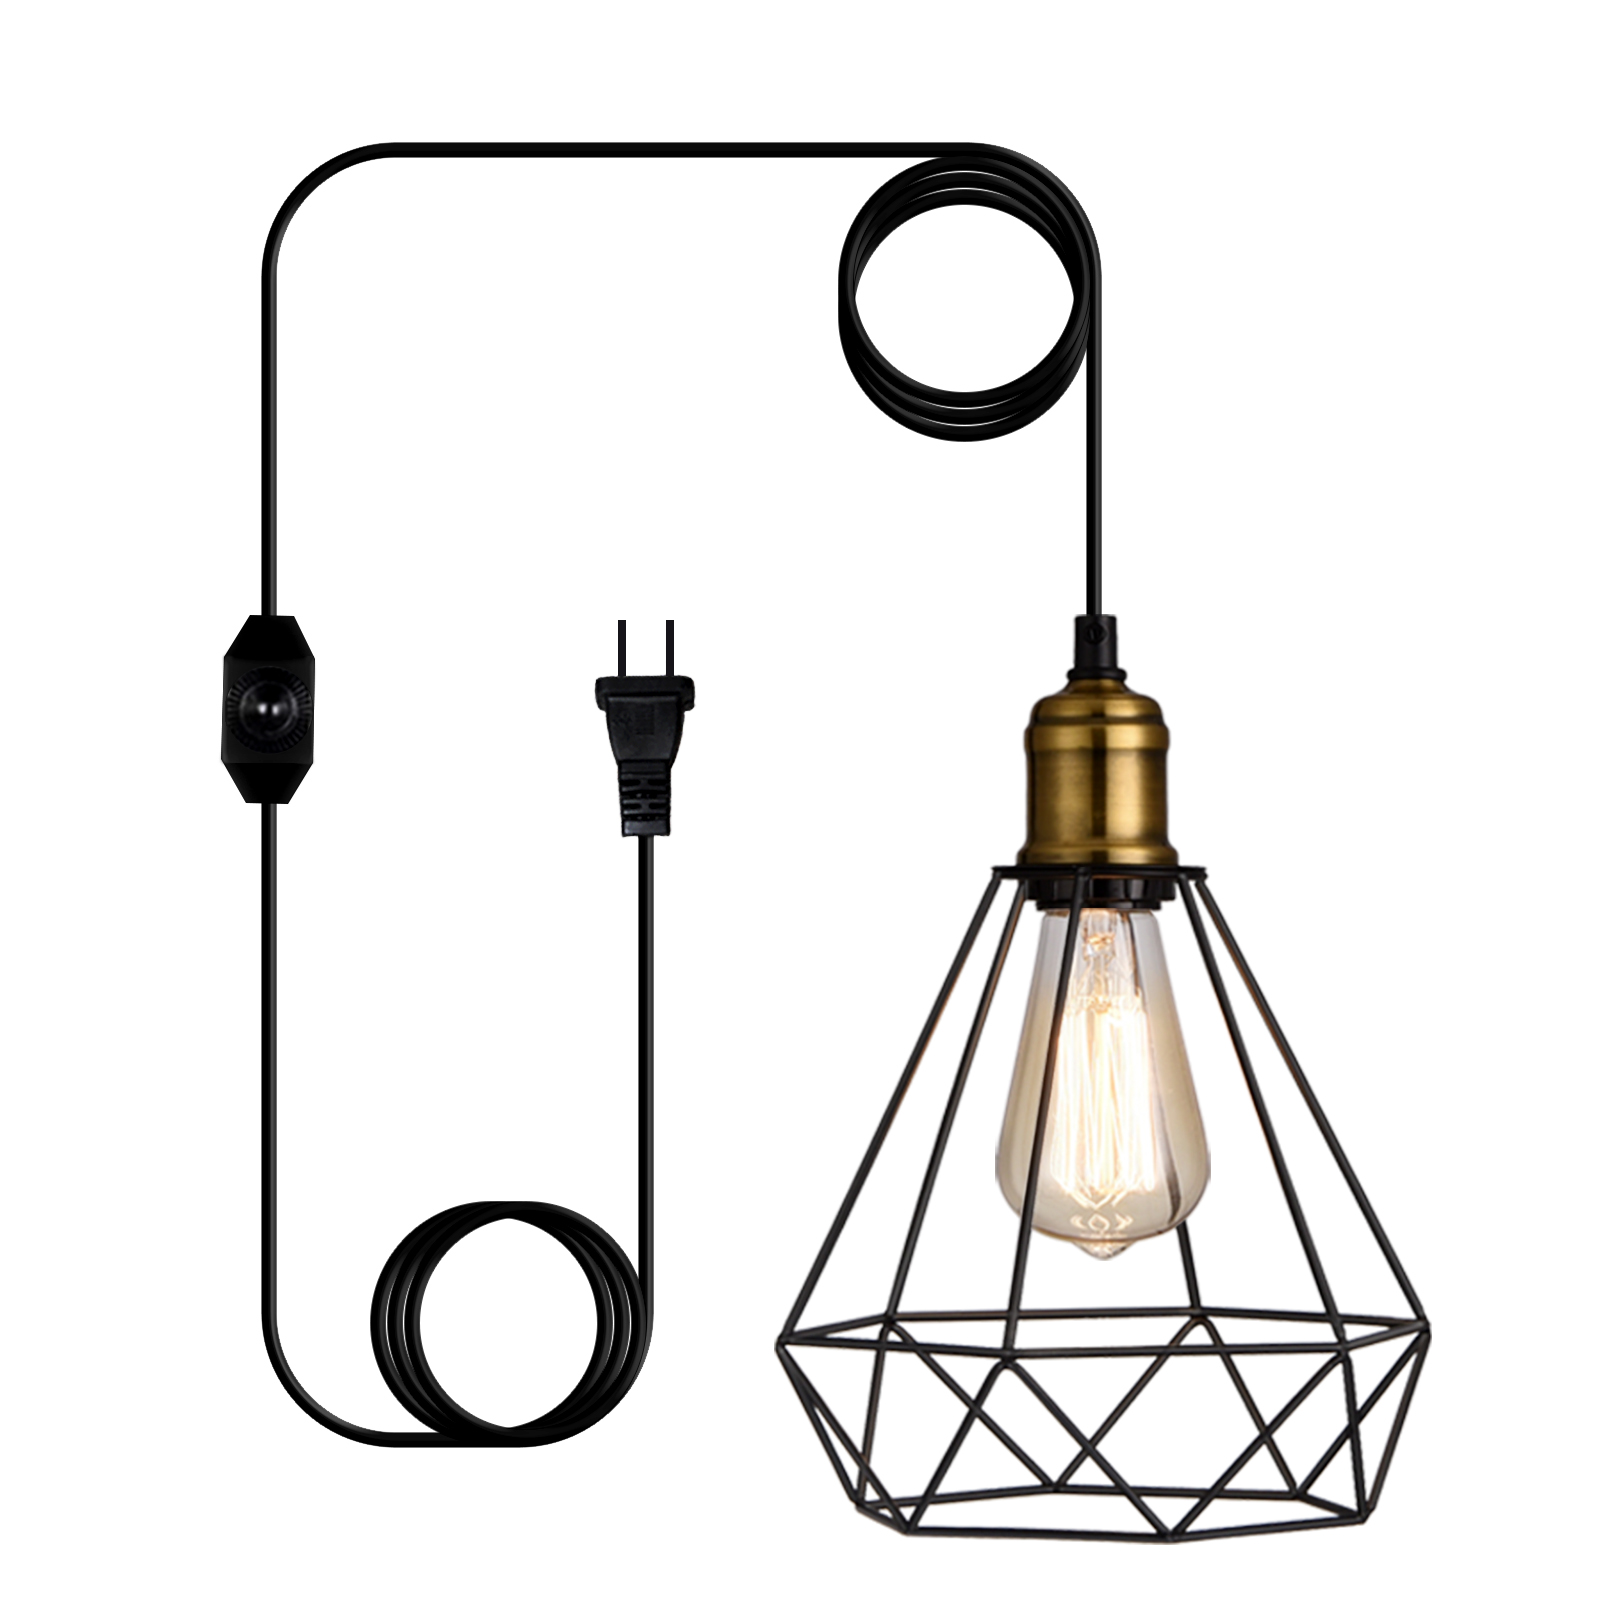 LIGHTESS Plug in Pendant Lights with Dimmer Switch ...